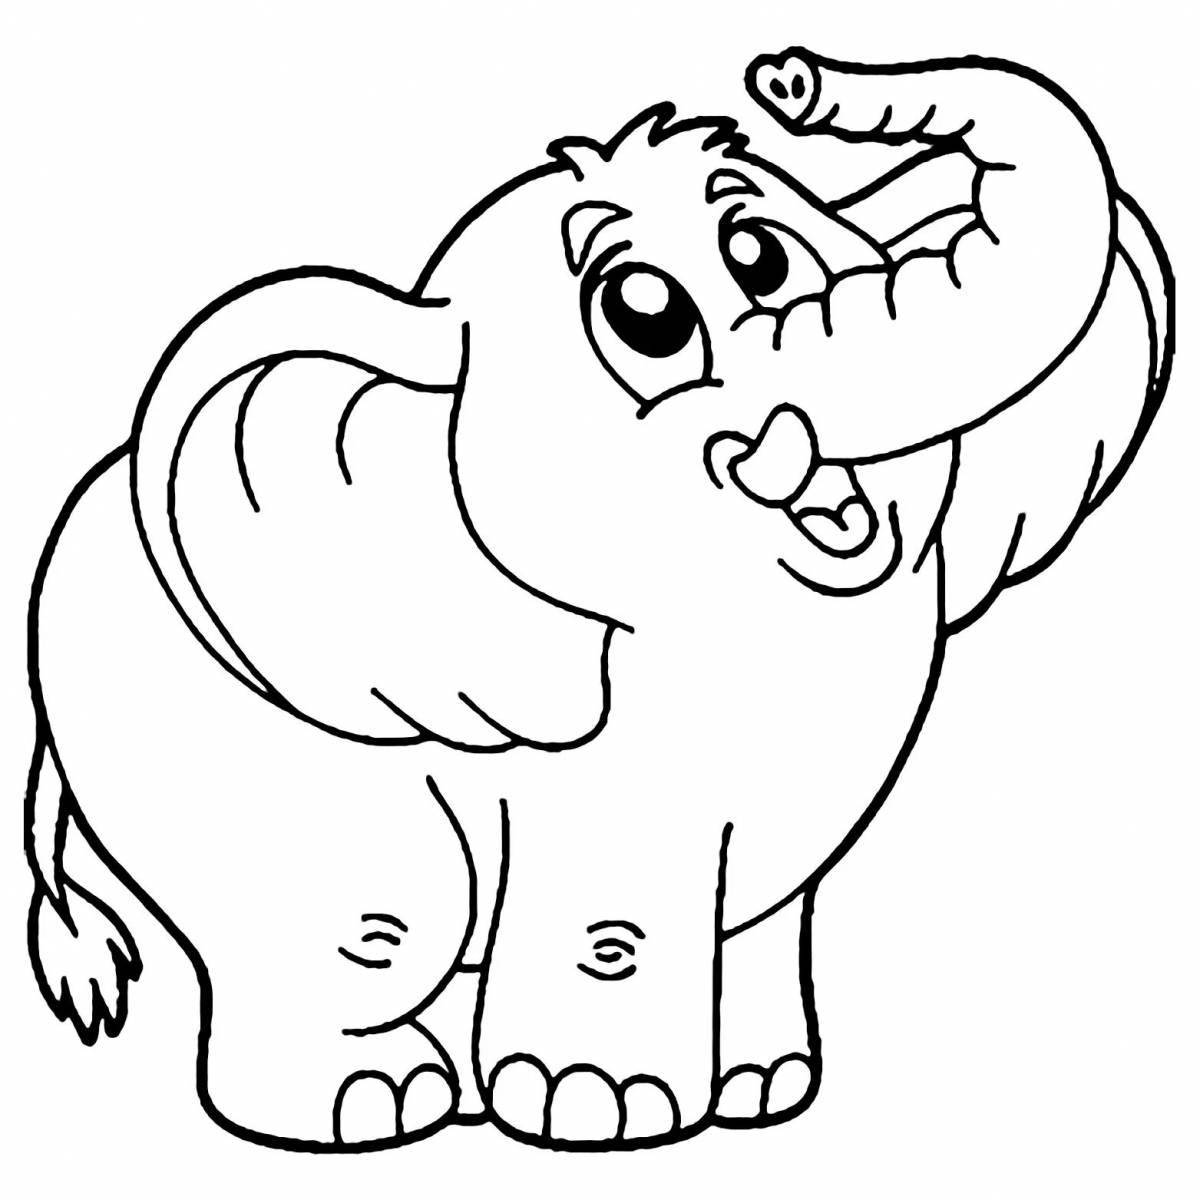 Cute elephant coloring pages for kids